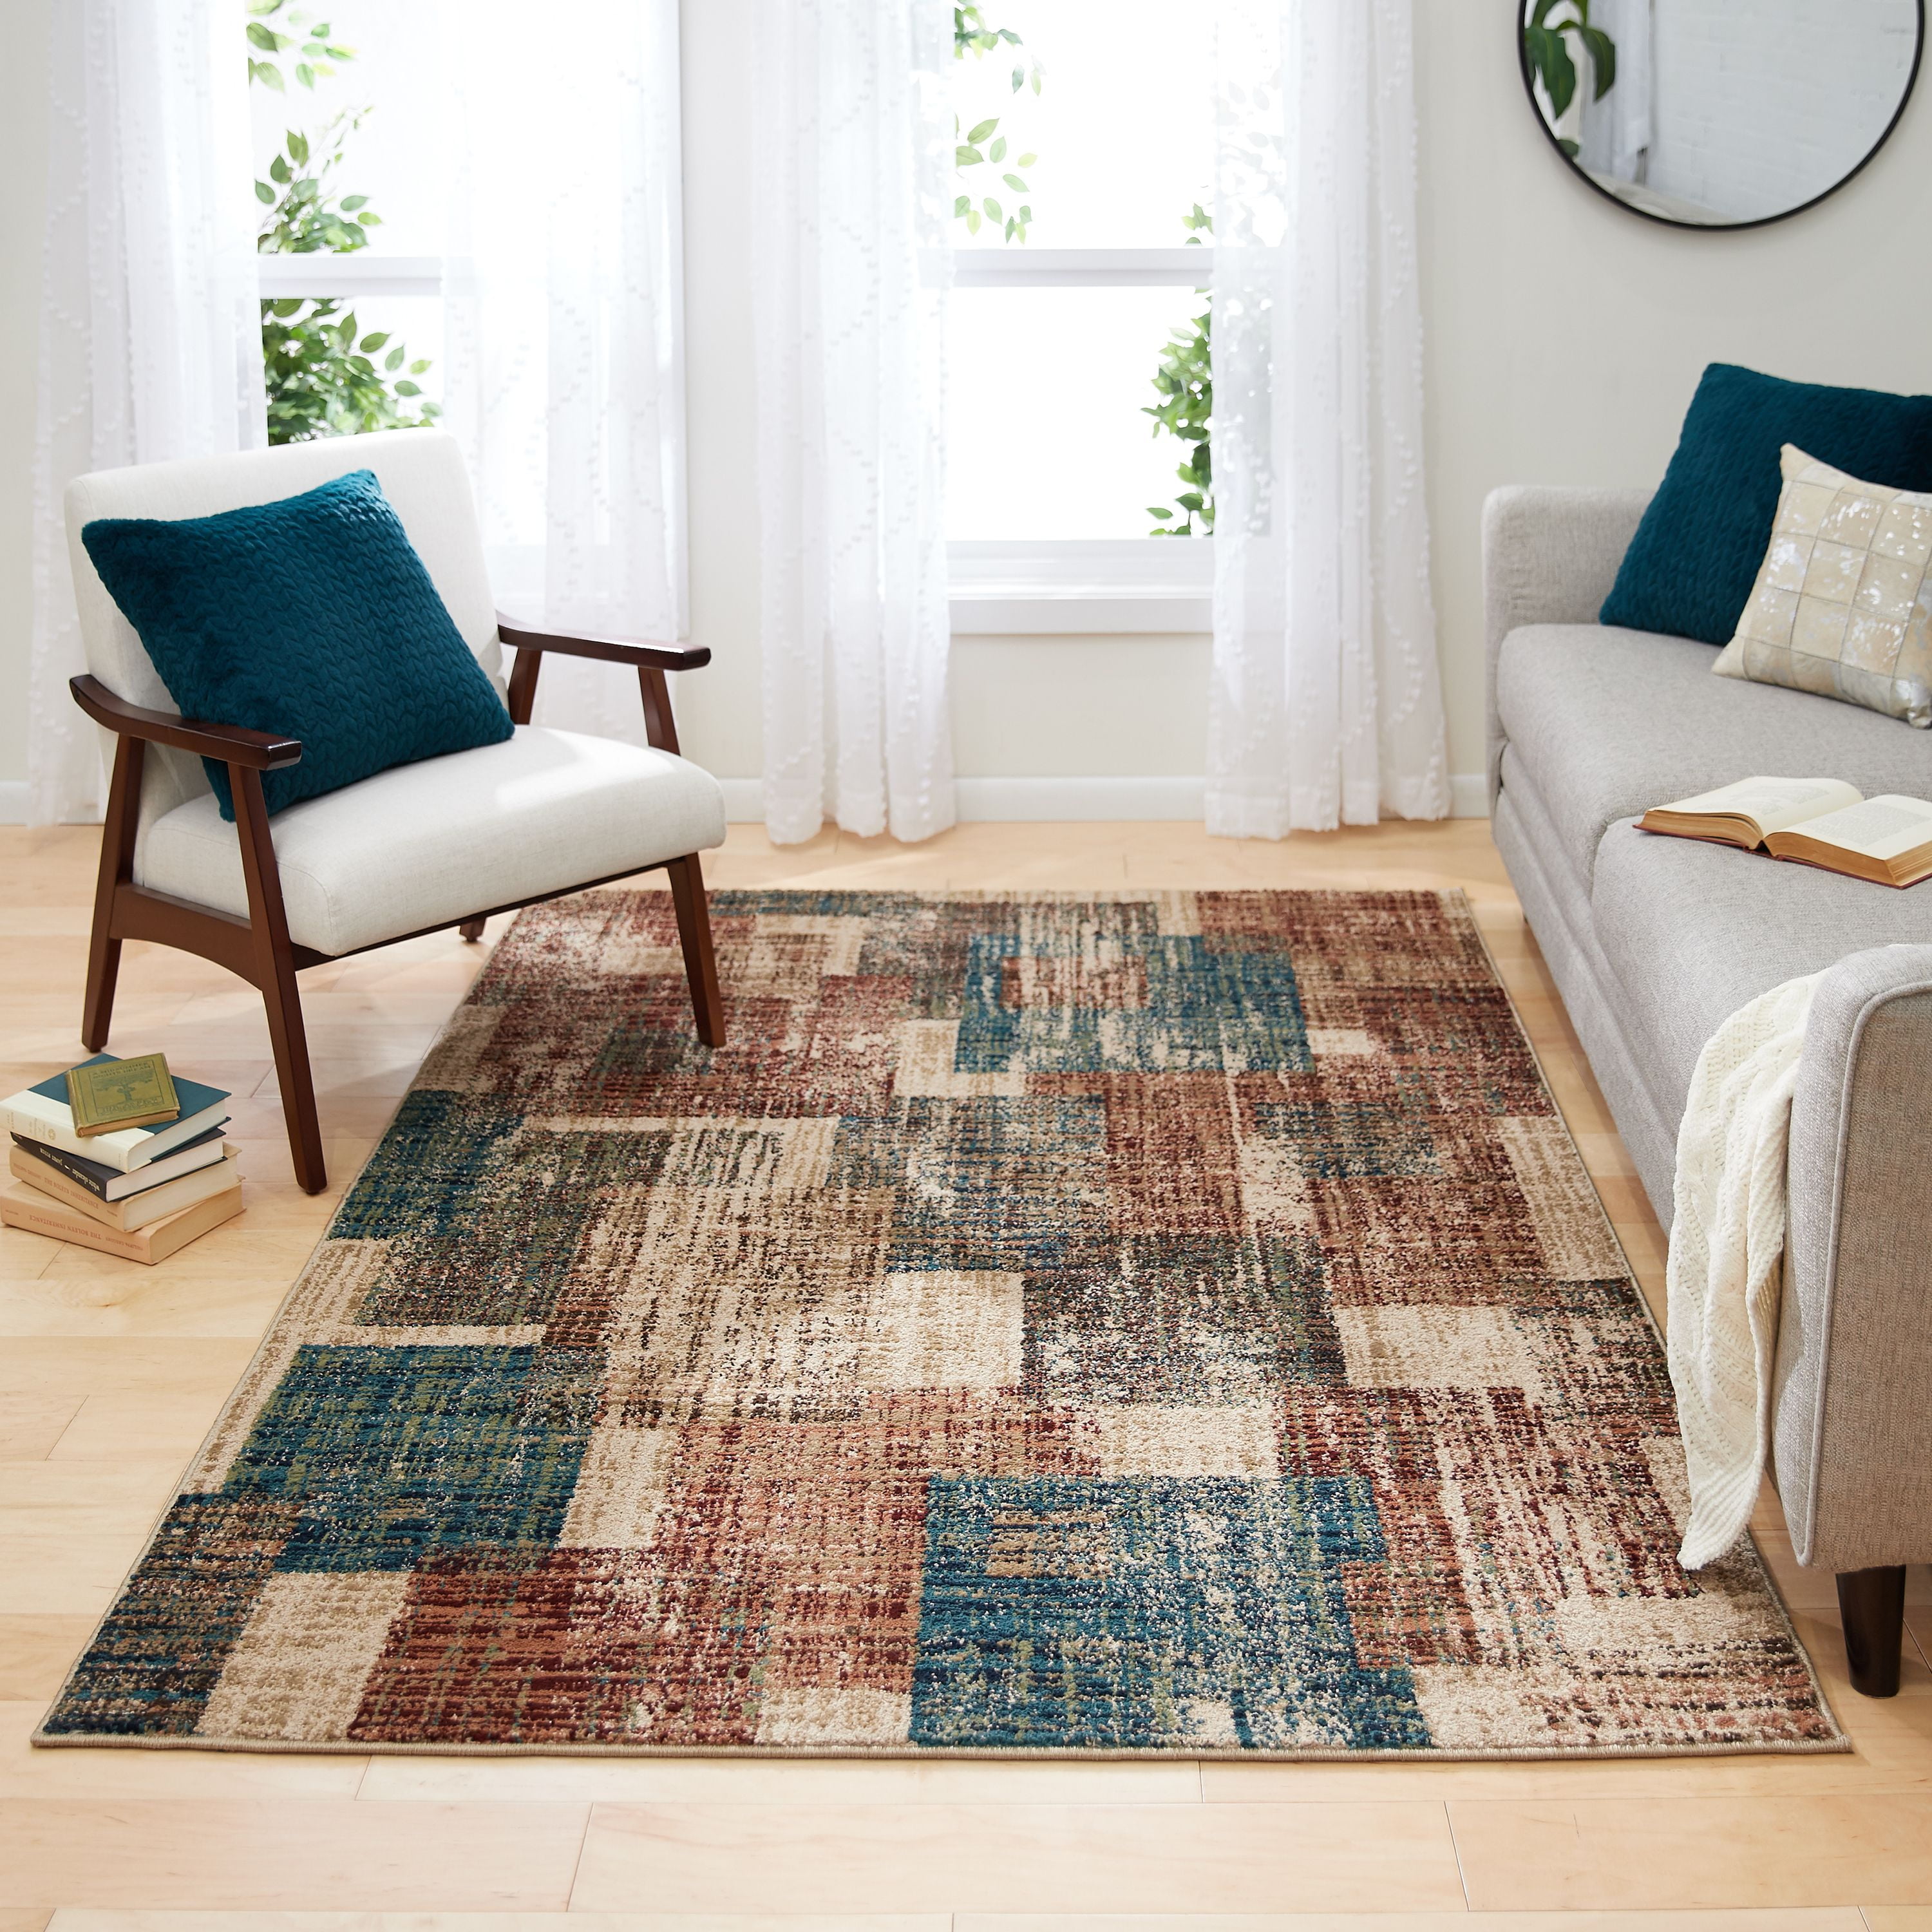 Mainstays Brown Abstract Tiles Area Rug, Images Of Living Rooms With Area Rugs